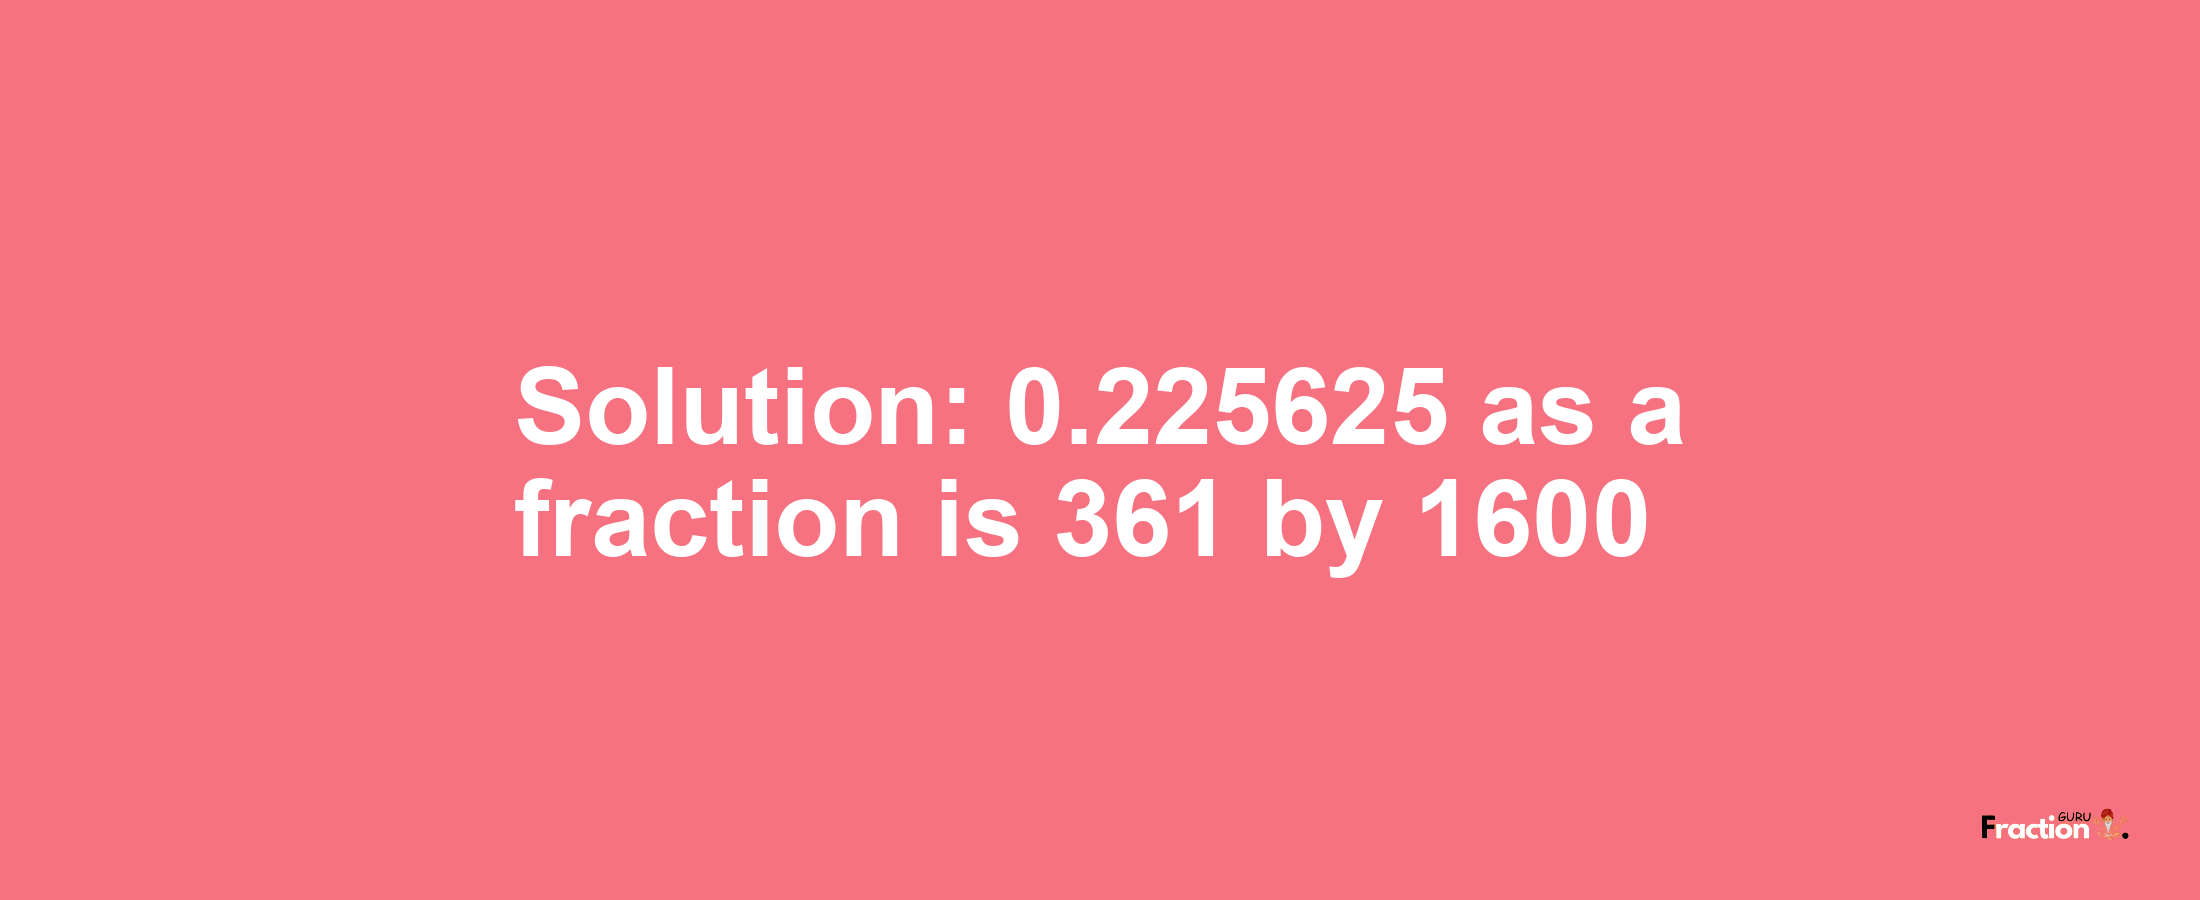 Solution:0.225625 as a fraction is 361/1600